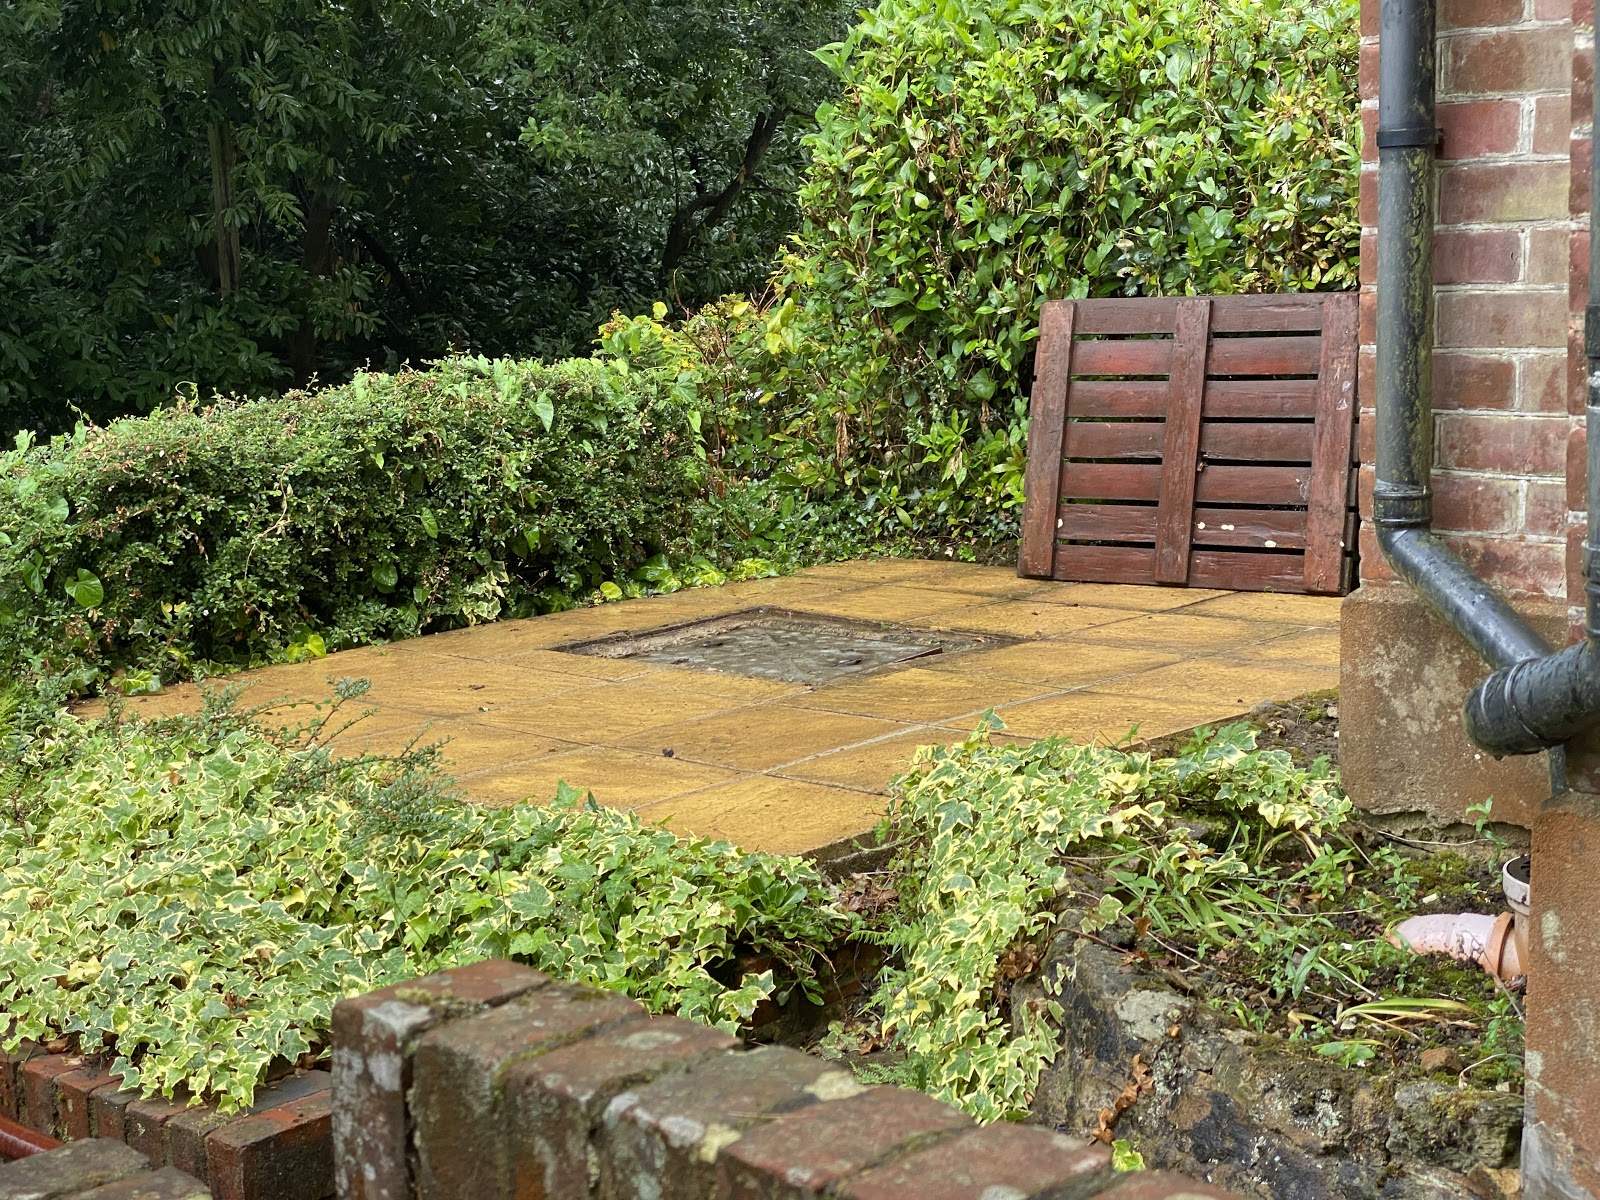 This image shows a drainage manhole on a patio.